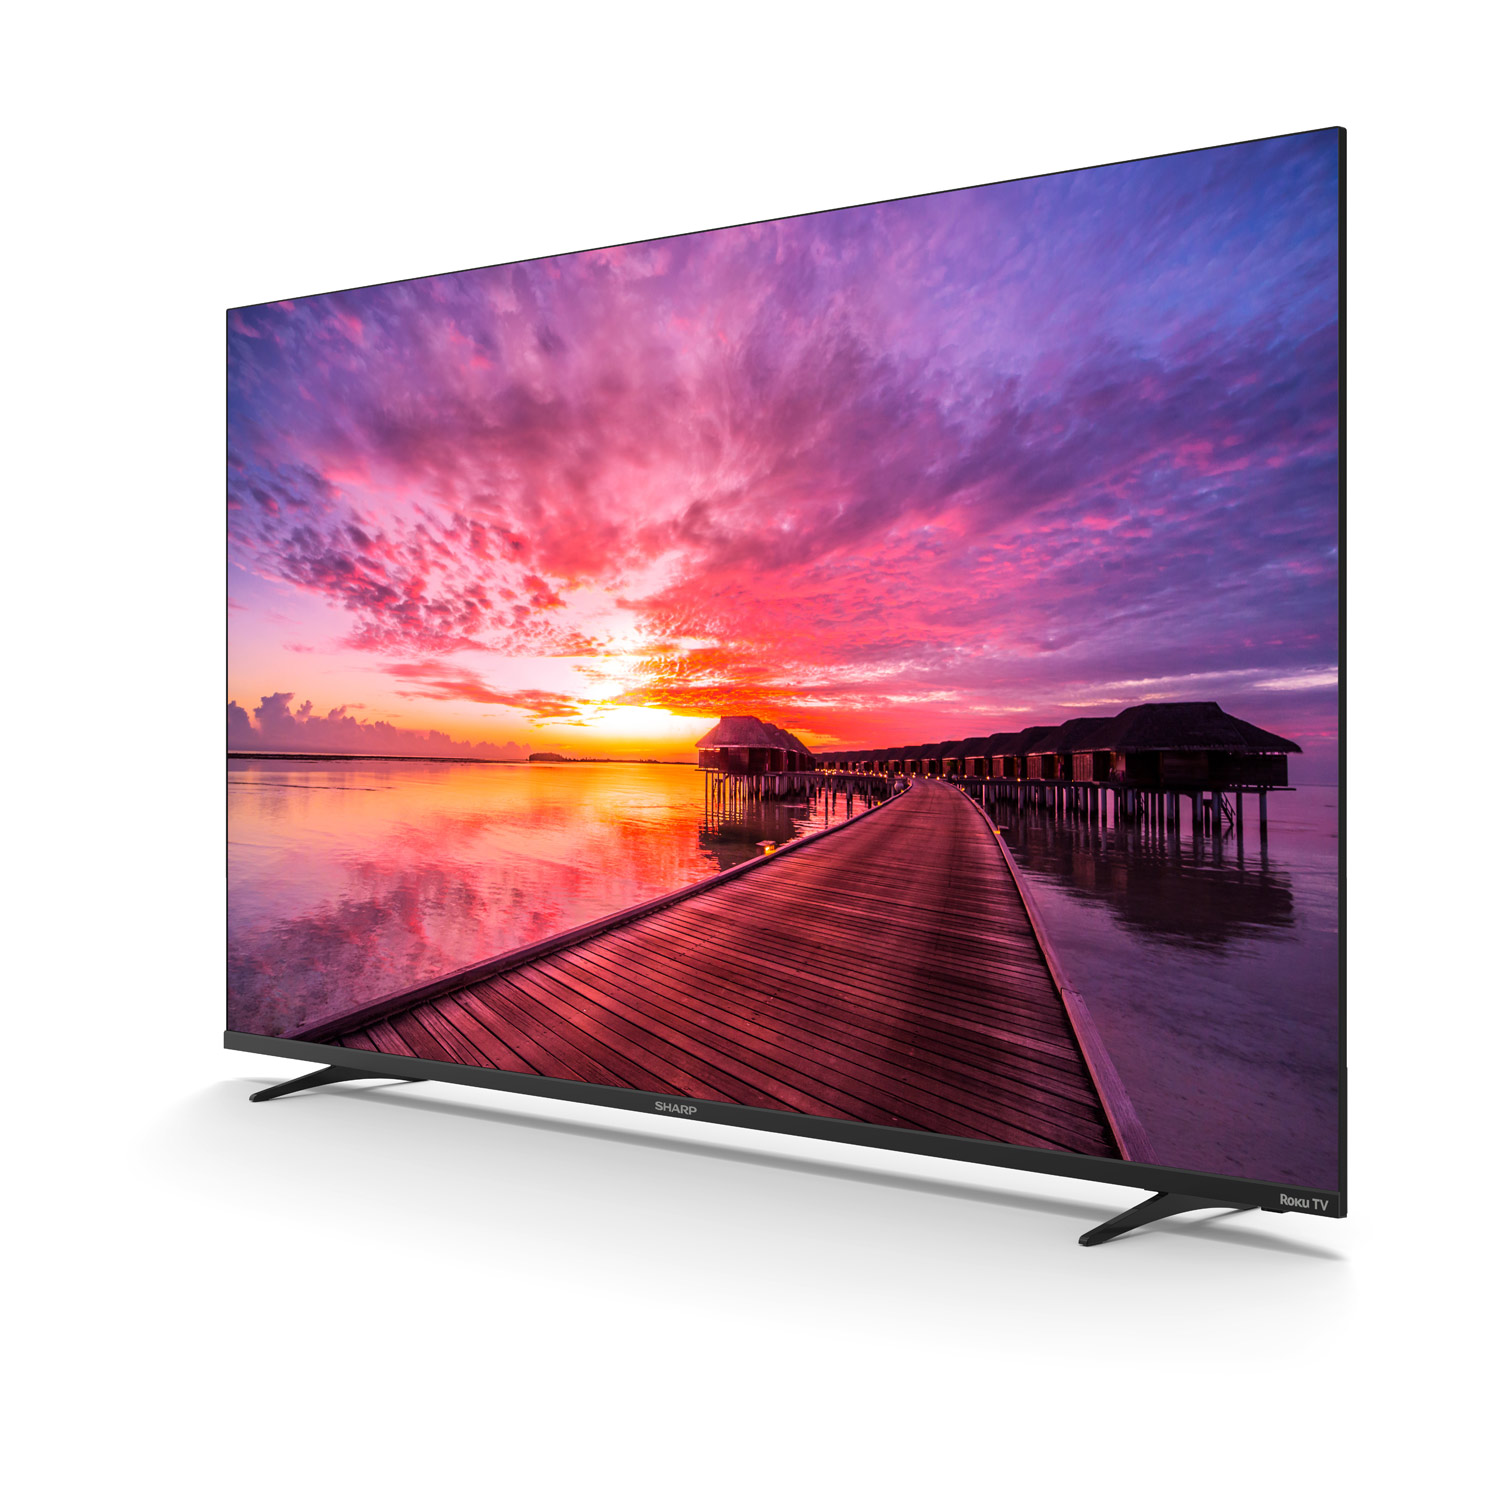 Left Side Angle View of the SHARP® AQUOS 65" Class (64.5" diag.) LED 4K Smart Roku TV with HDR10 (4T-C65DL7UR)